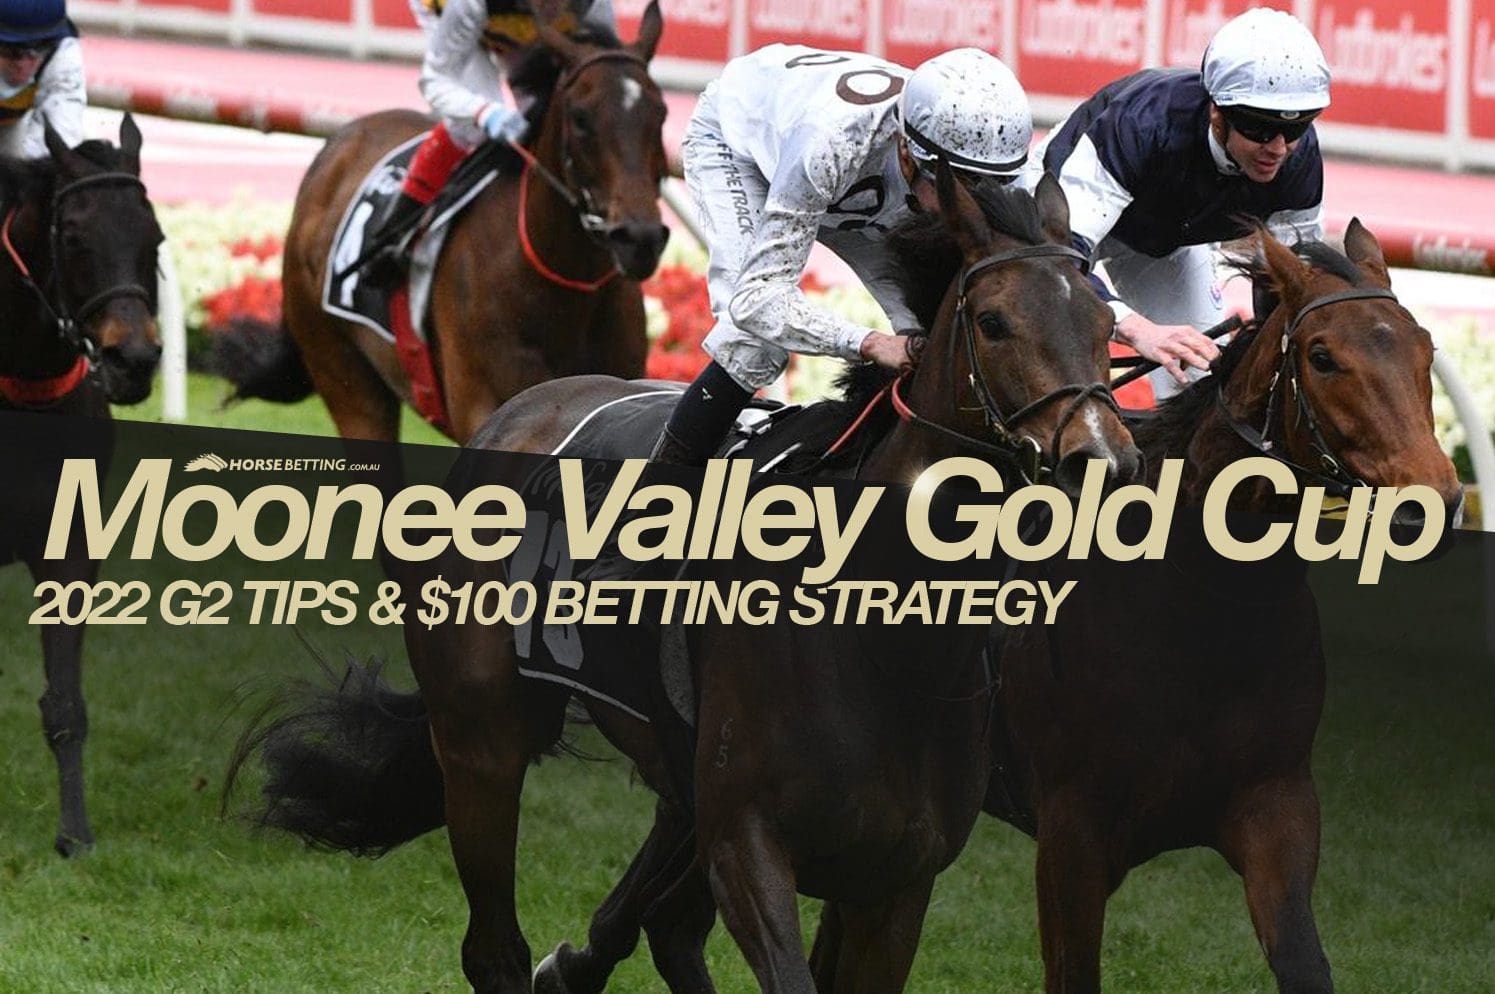 Moonee Valley Gold Cup tips